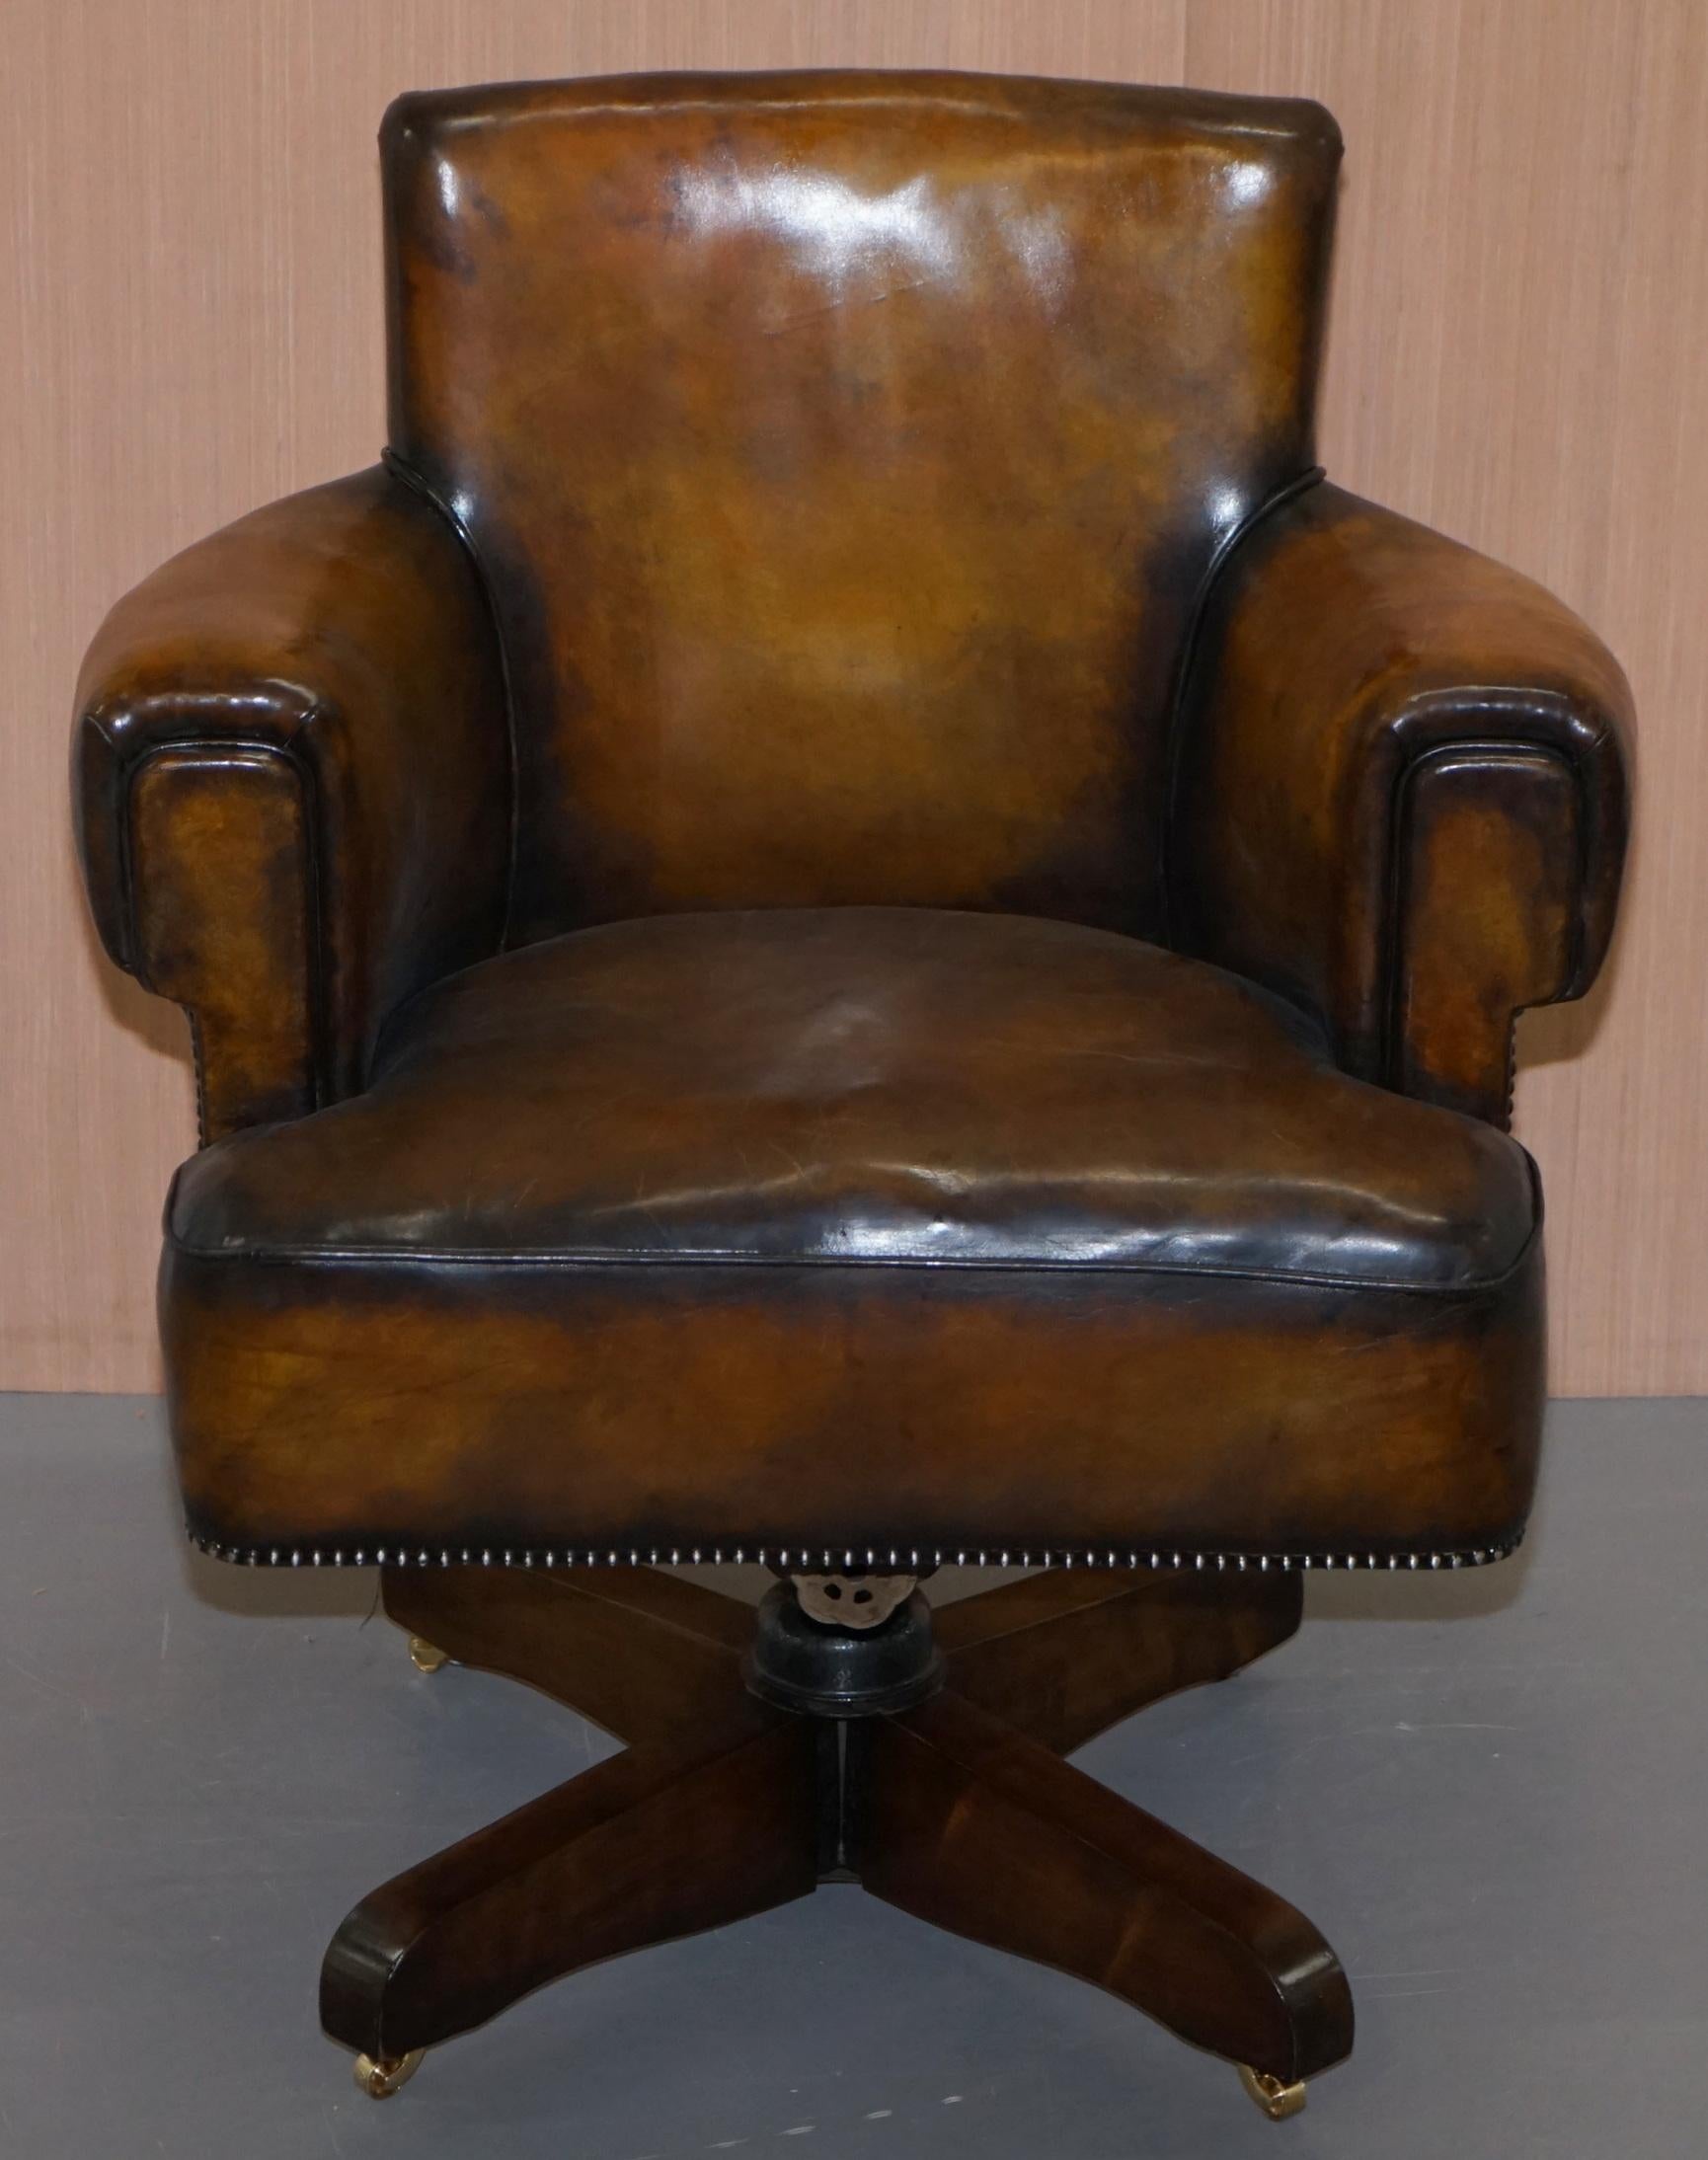 We are delighted to offer for sale this absolutely stunning fully restored Art Deco 1920s hillcrest hand dyed aged cigar brown leather captains chair

A very good looking well made and comfortable office chair, it is height adjustable, there is a